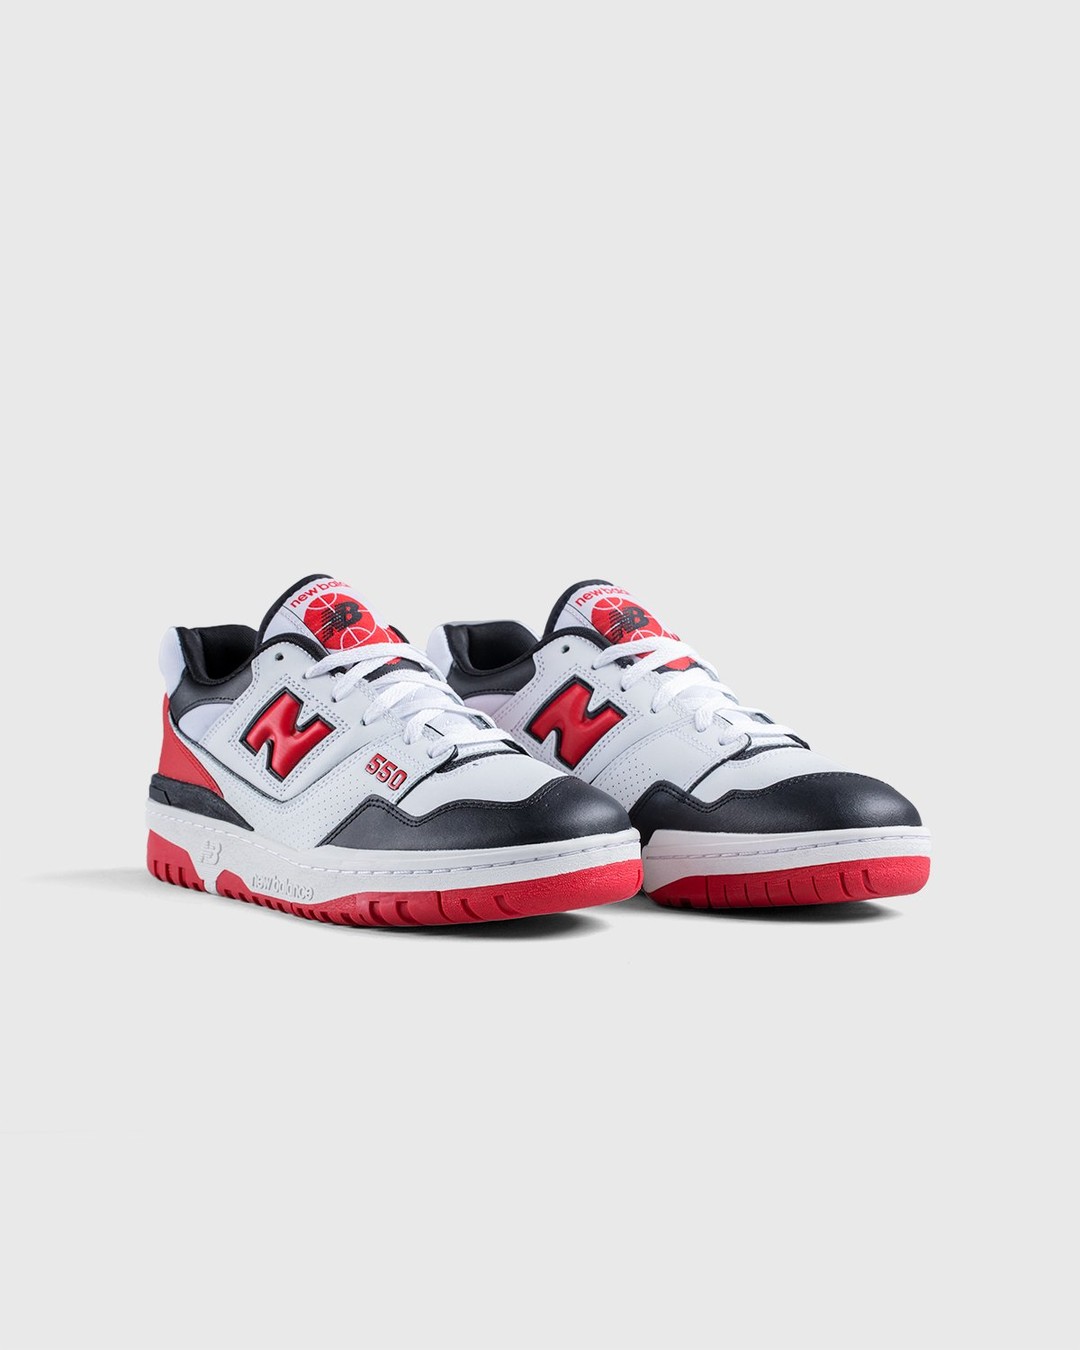 New Balance – BB550HR1 White Red Black - Sneakers - White - Image 3